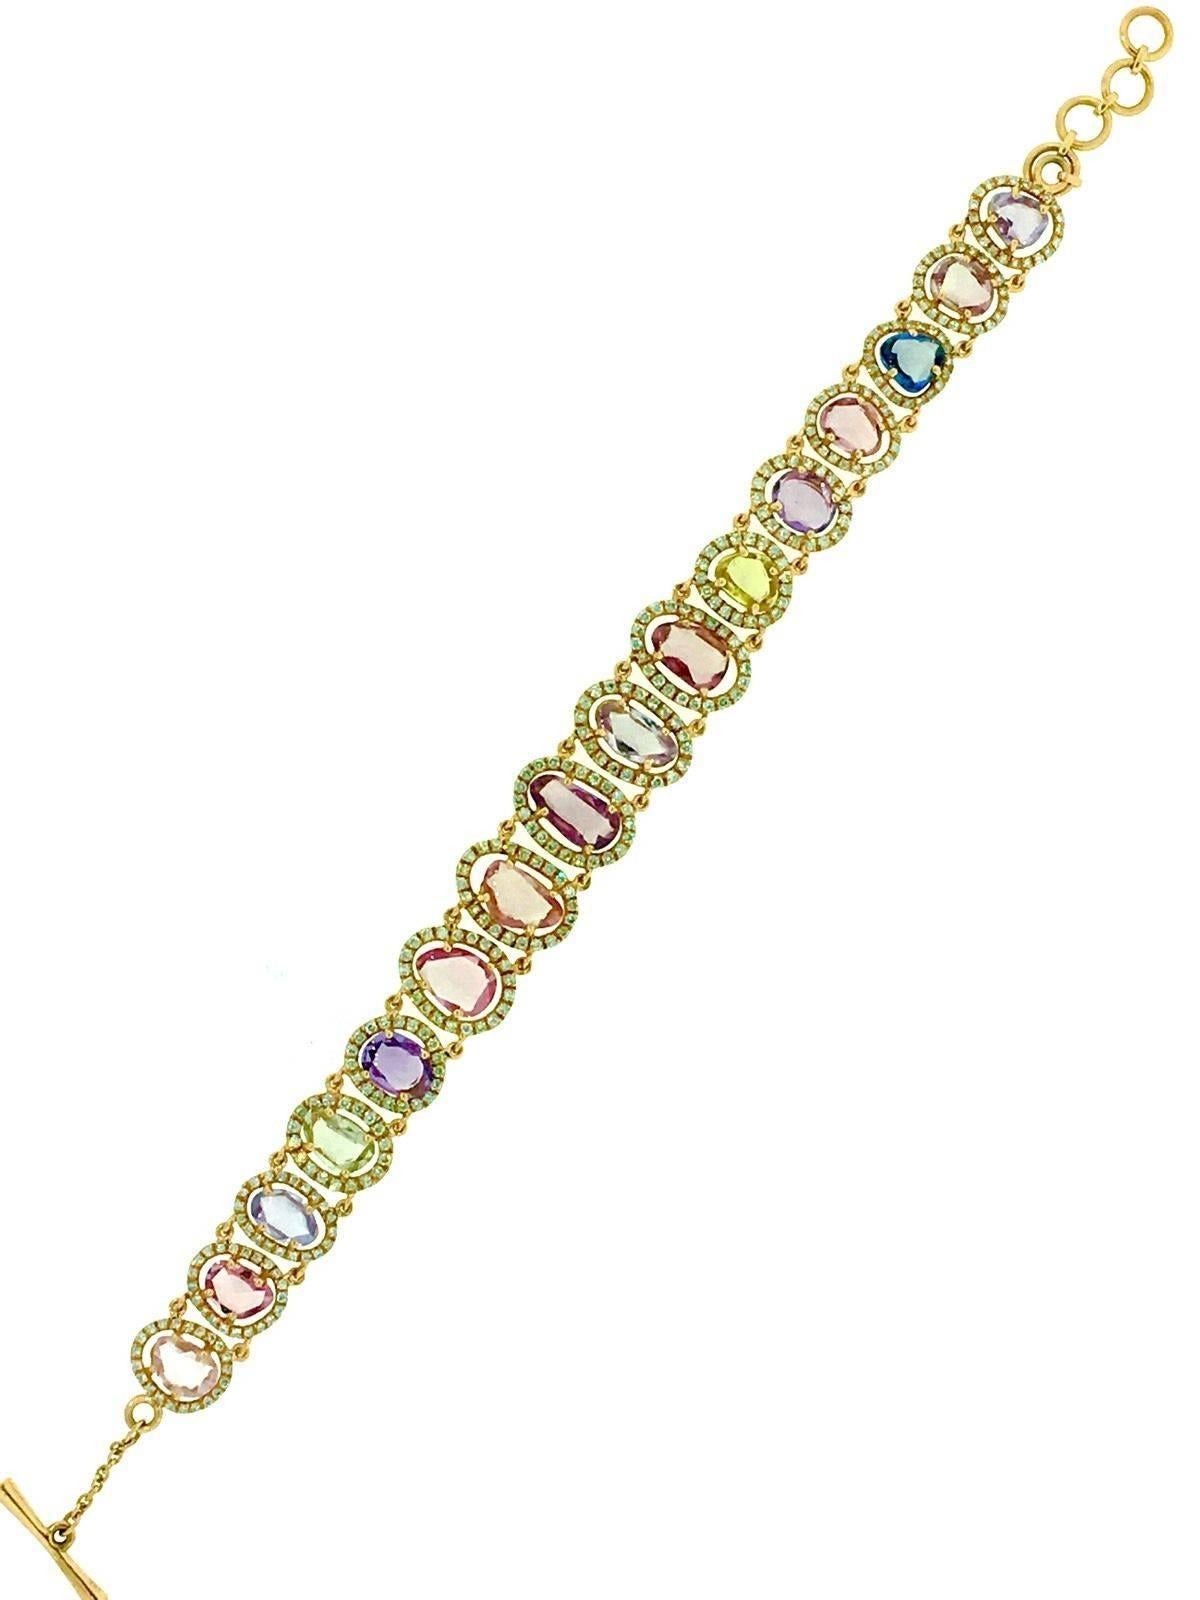 Multicolor Sapphires set with diamond in 18k rose gold. There are 16 rose cut Sapphires varying shapes and colors-- soft hues of pink, purple,  blue and yellow and graduating in size.  Approximately 10 to 12 carats in total.
Surrounding each